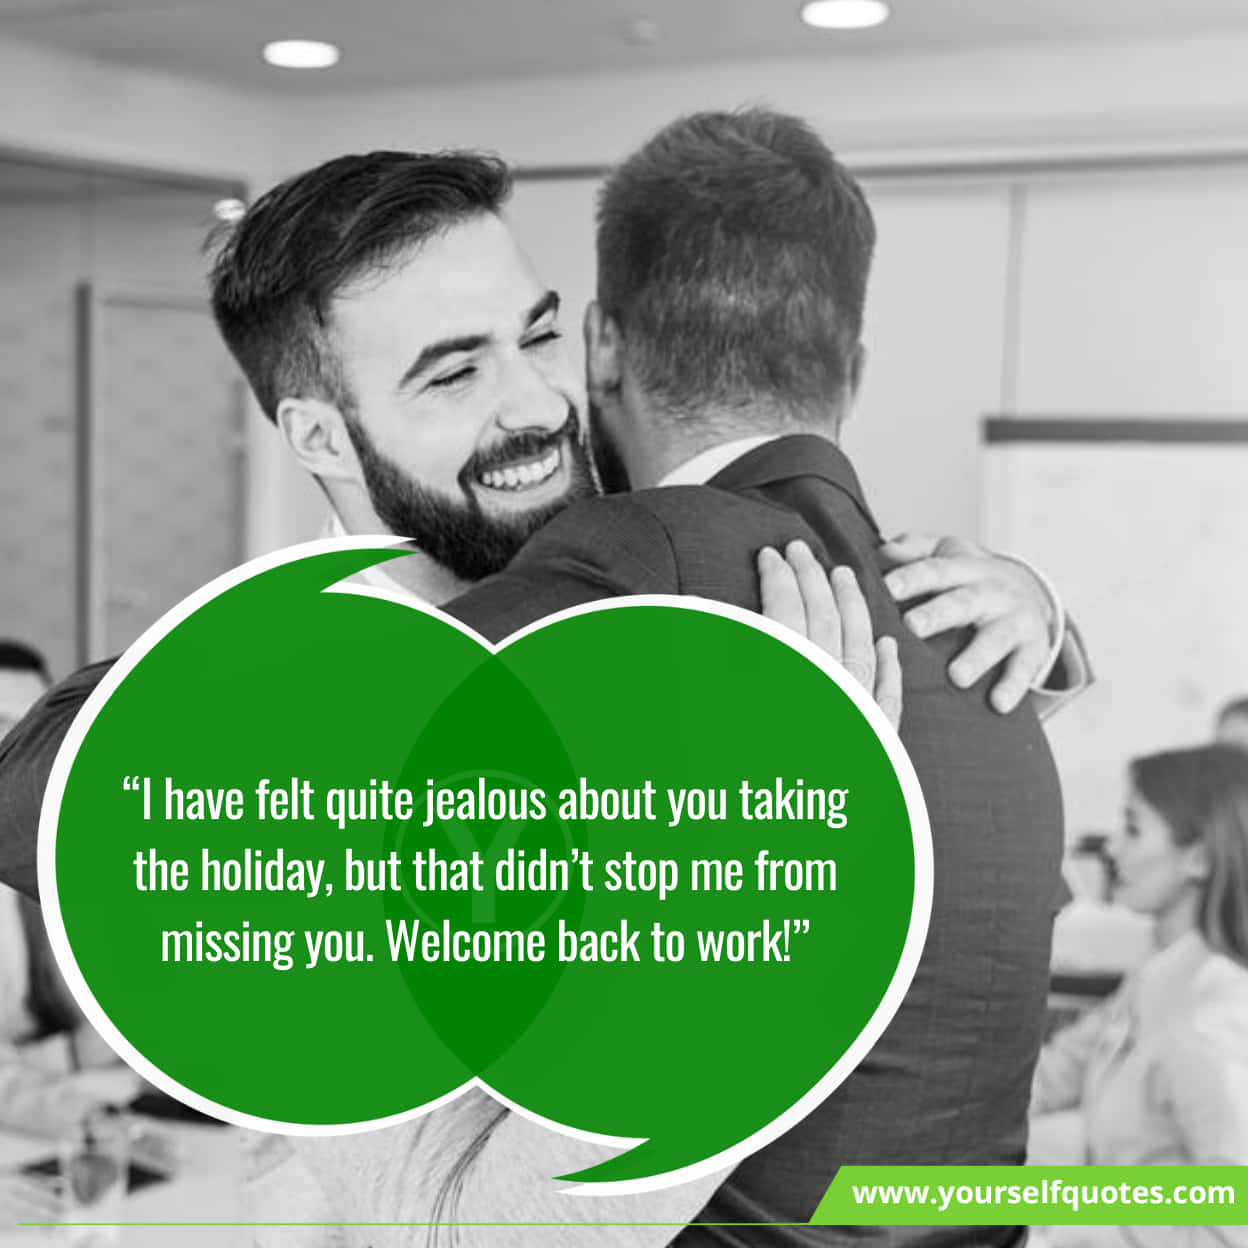 welcome back to work quotes and sayings